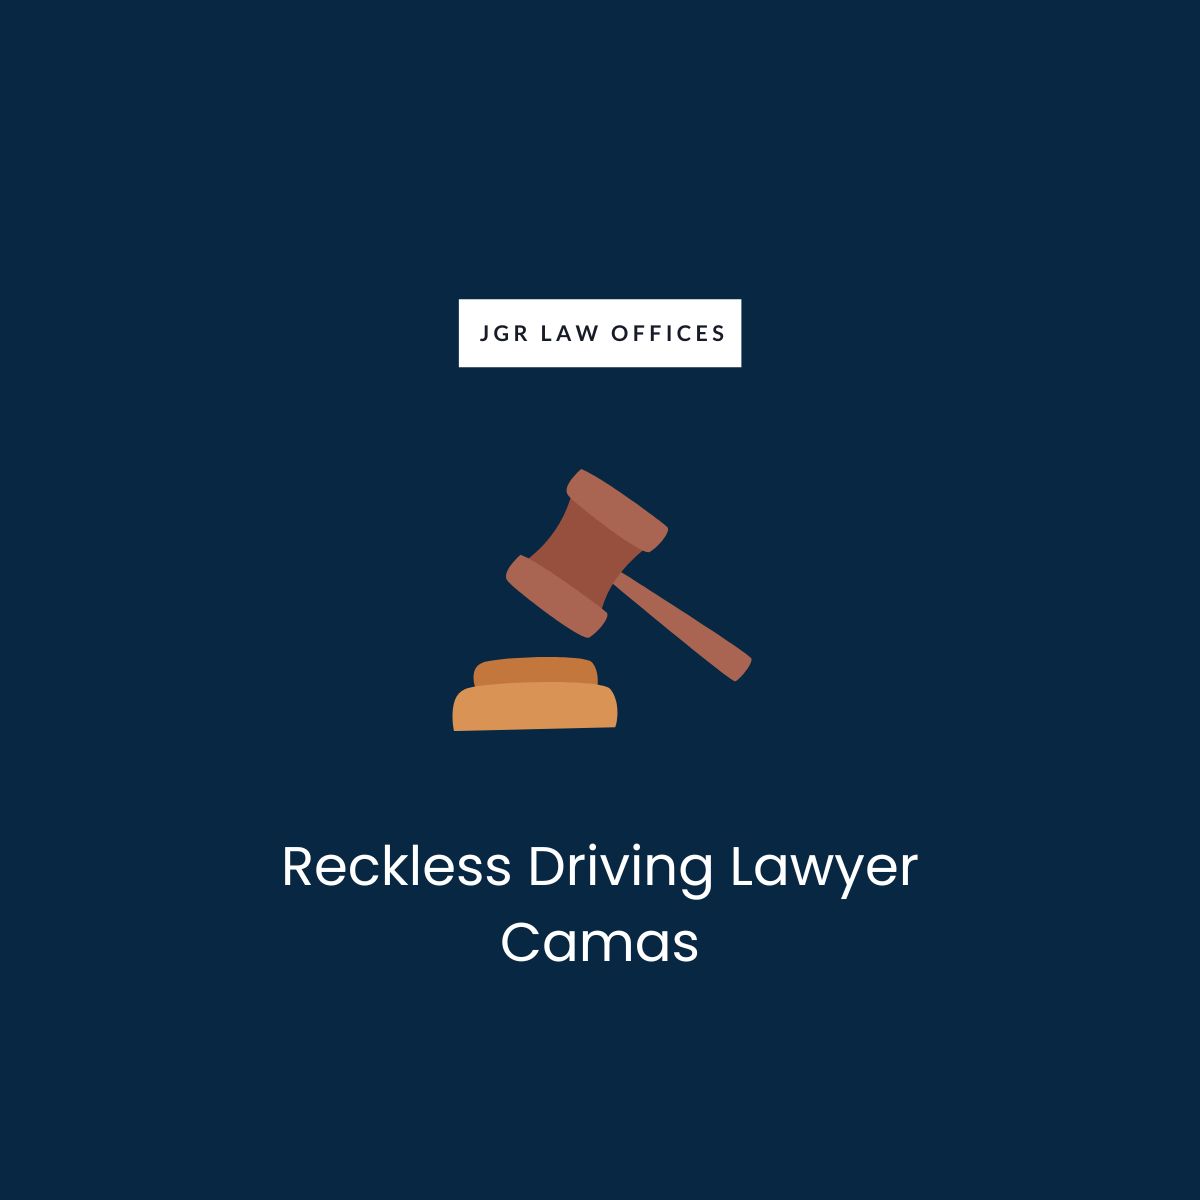 Reckless Driving Lawyer Camas Reckless Driving